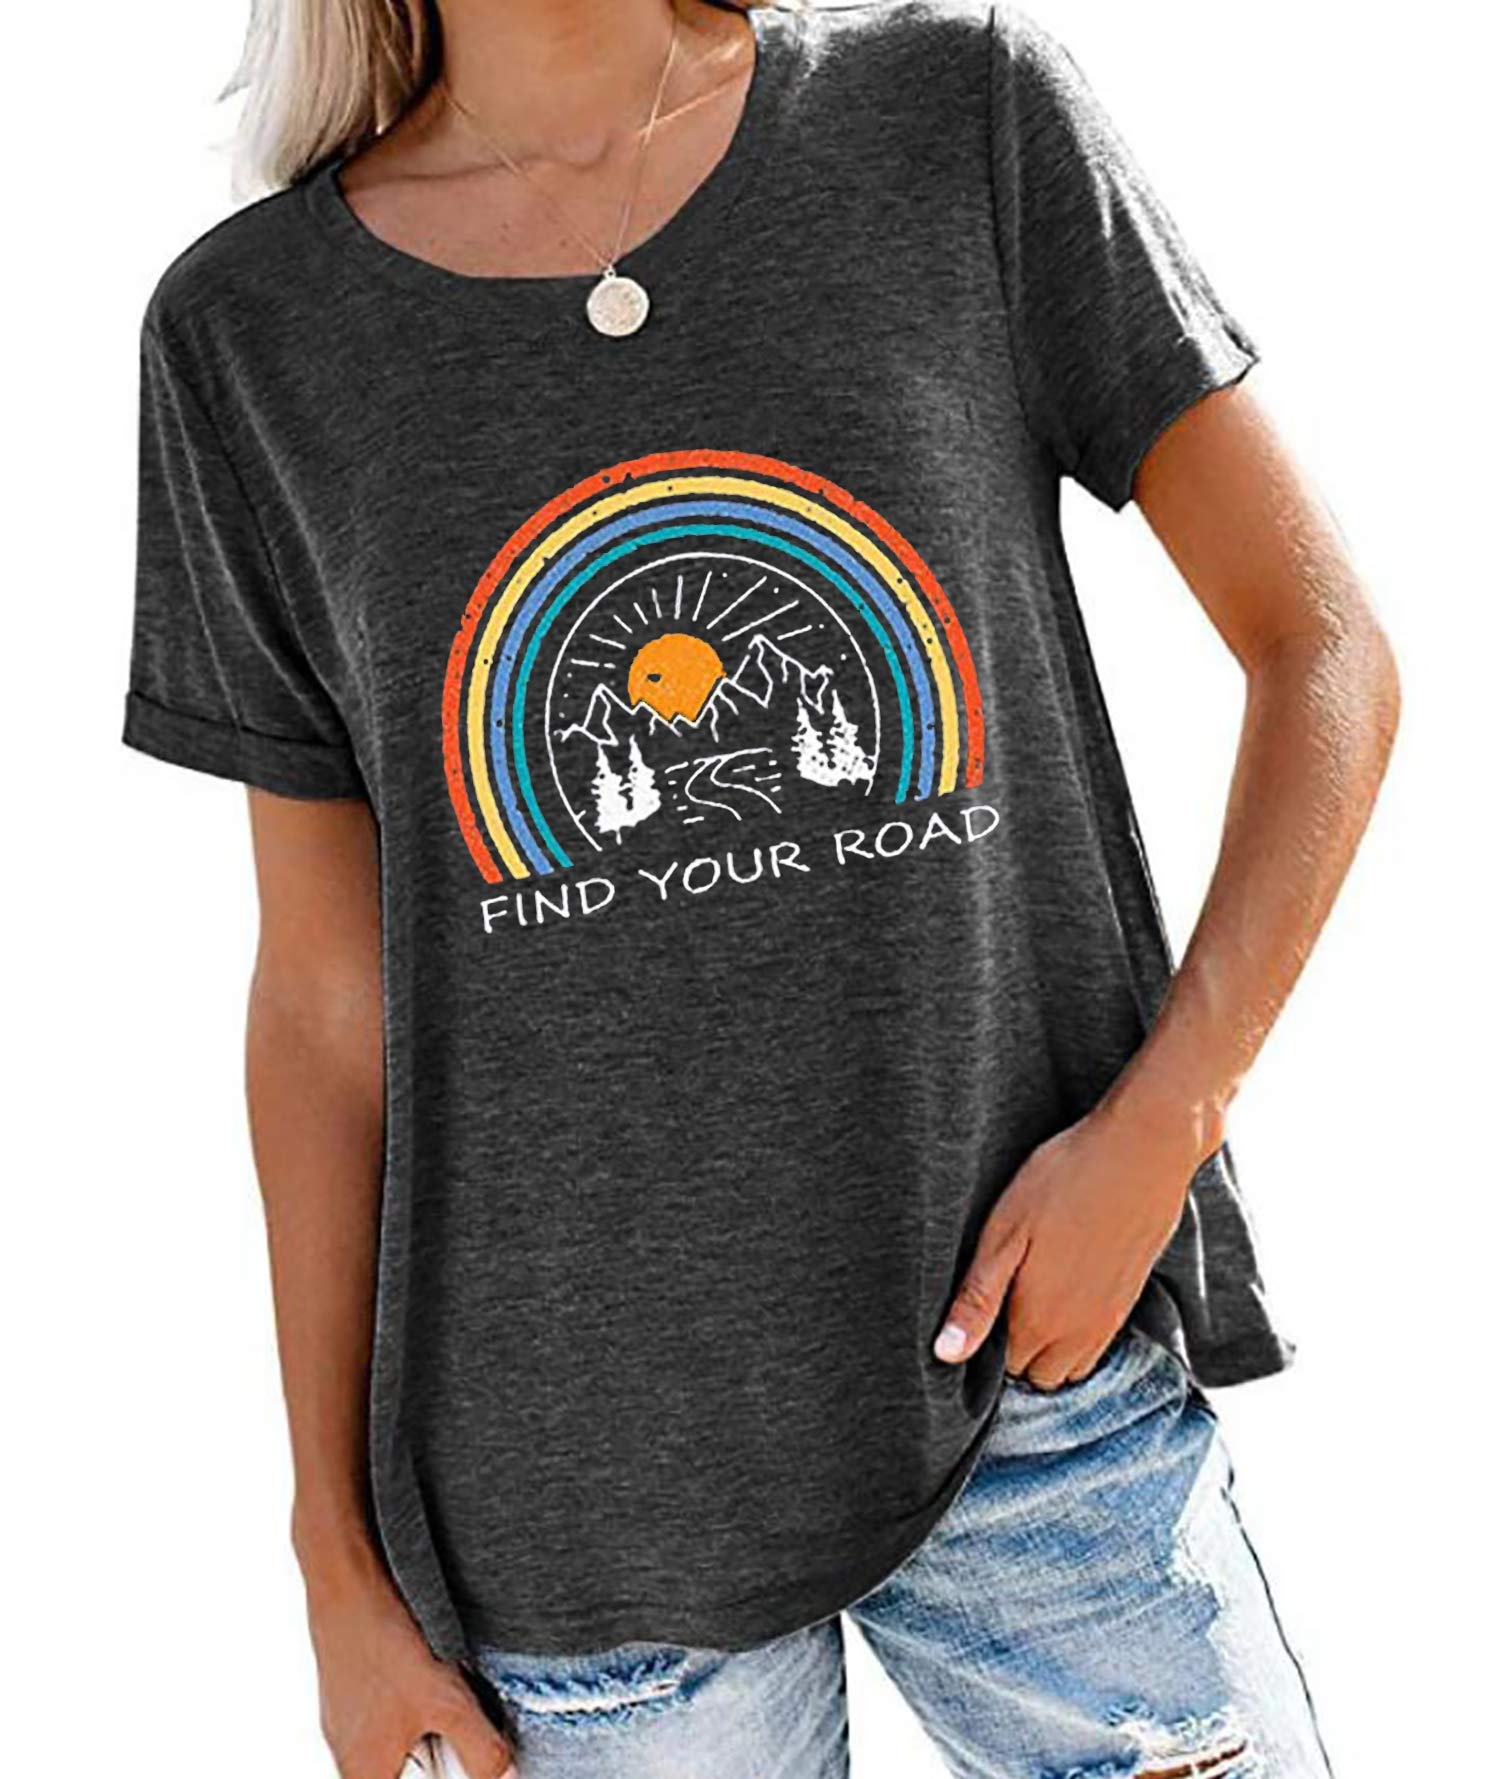 Book Cover Find Your Road Shirt Women Hiking Camping Shirts Tops Rainbow Graphic Tees Casual T Shirt Top Grey Small